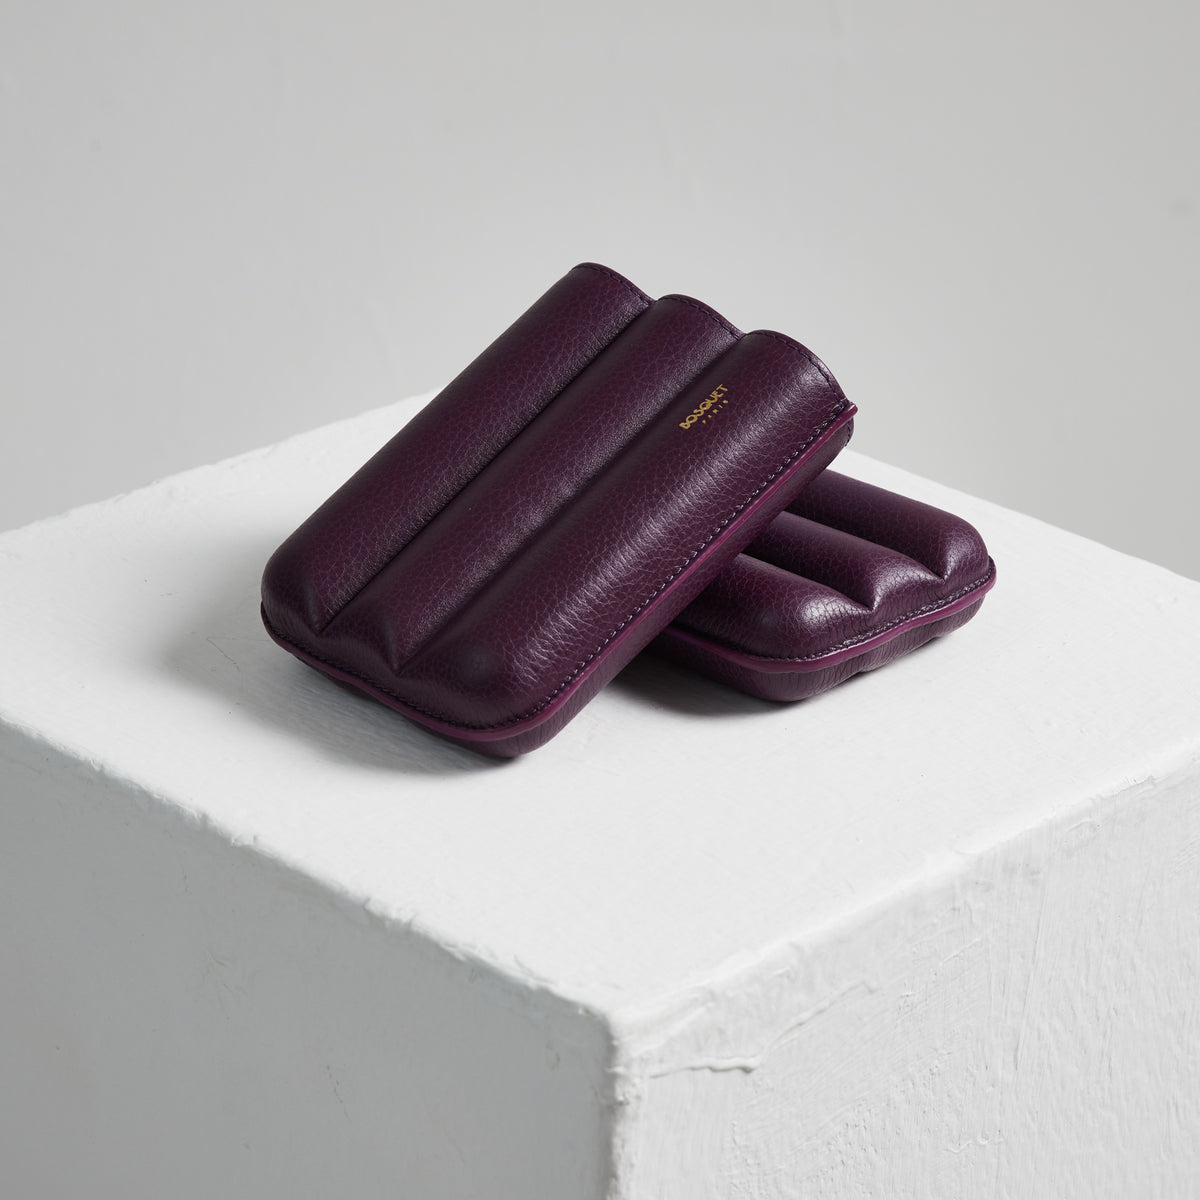 Two Bosque Smooth Purple Cylindrical Leather Cigar Cases sitting on top of a white cube.